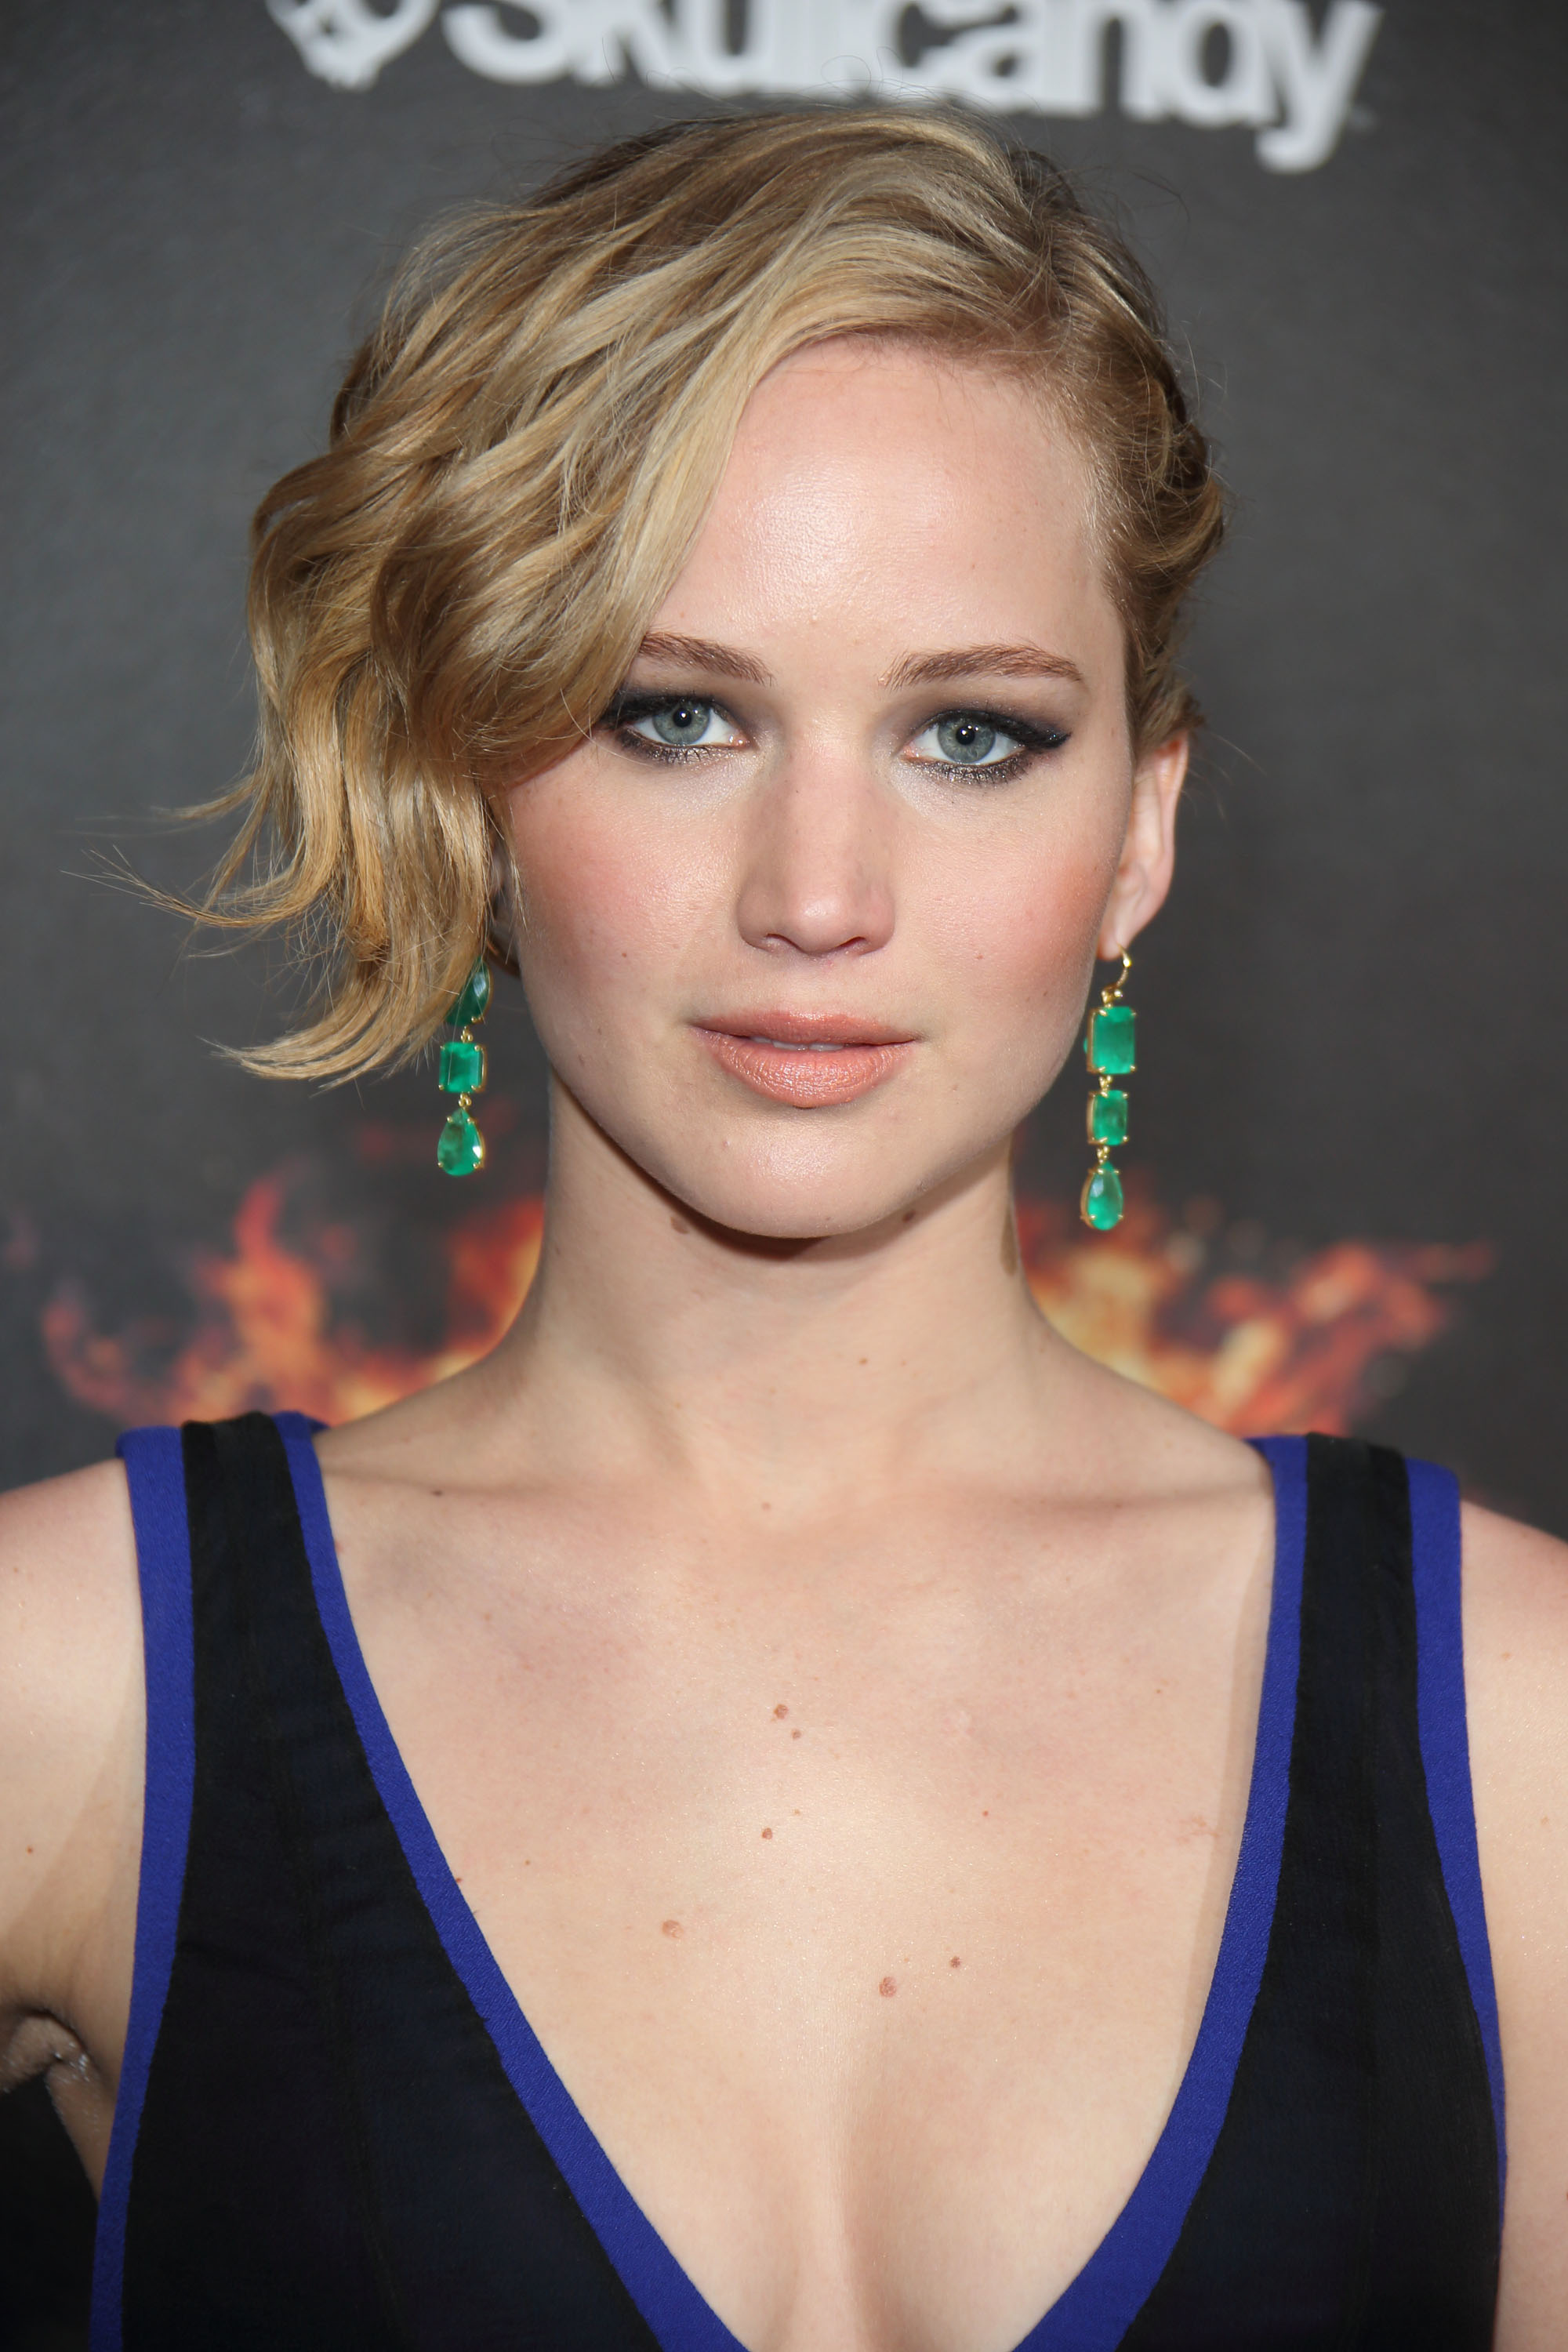 "The Hunger Games: Mockingjay Part 1" Party - The 67th Annual Cannes Film Festival